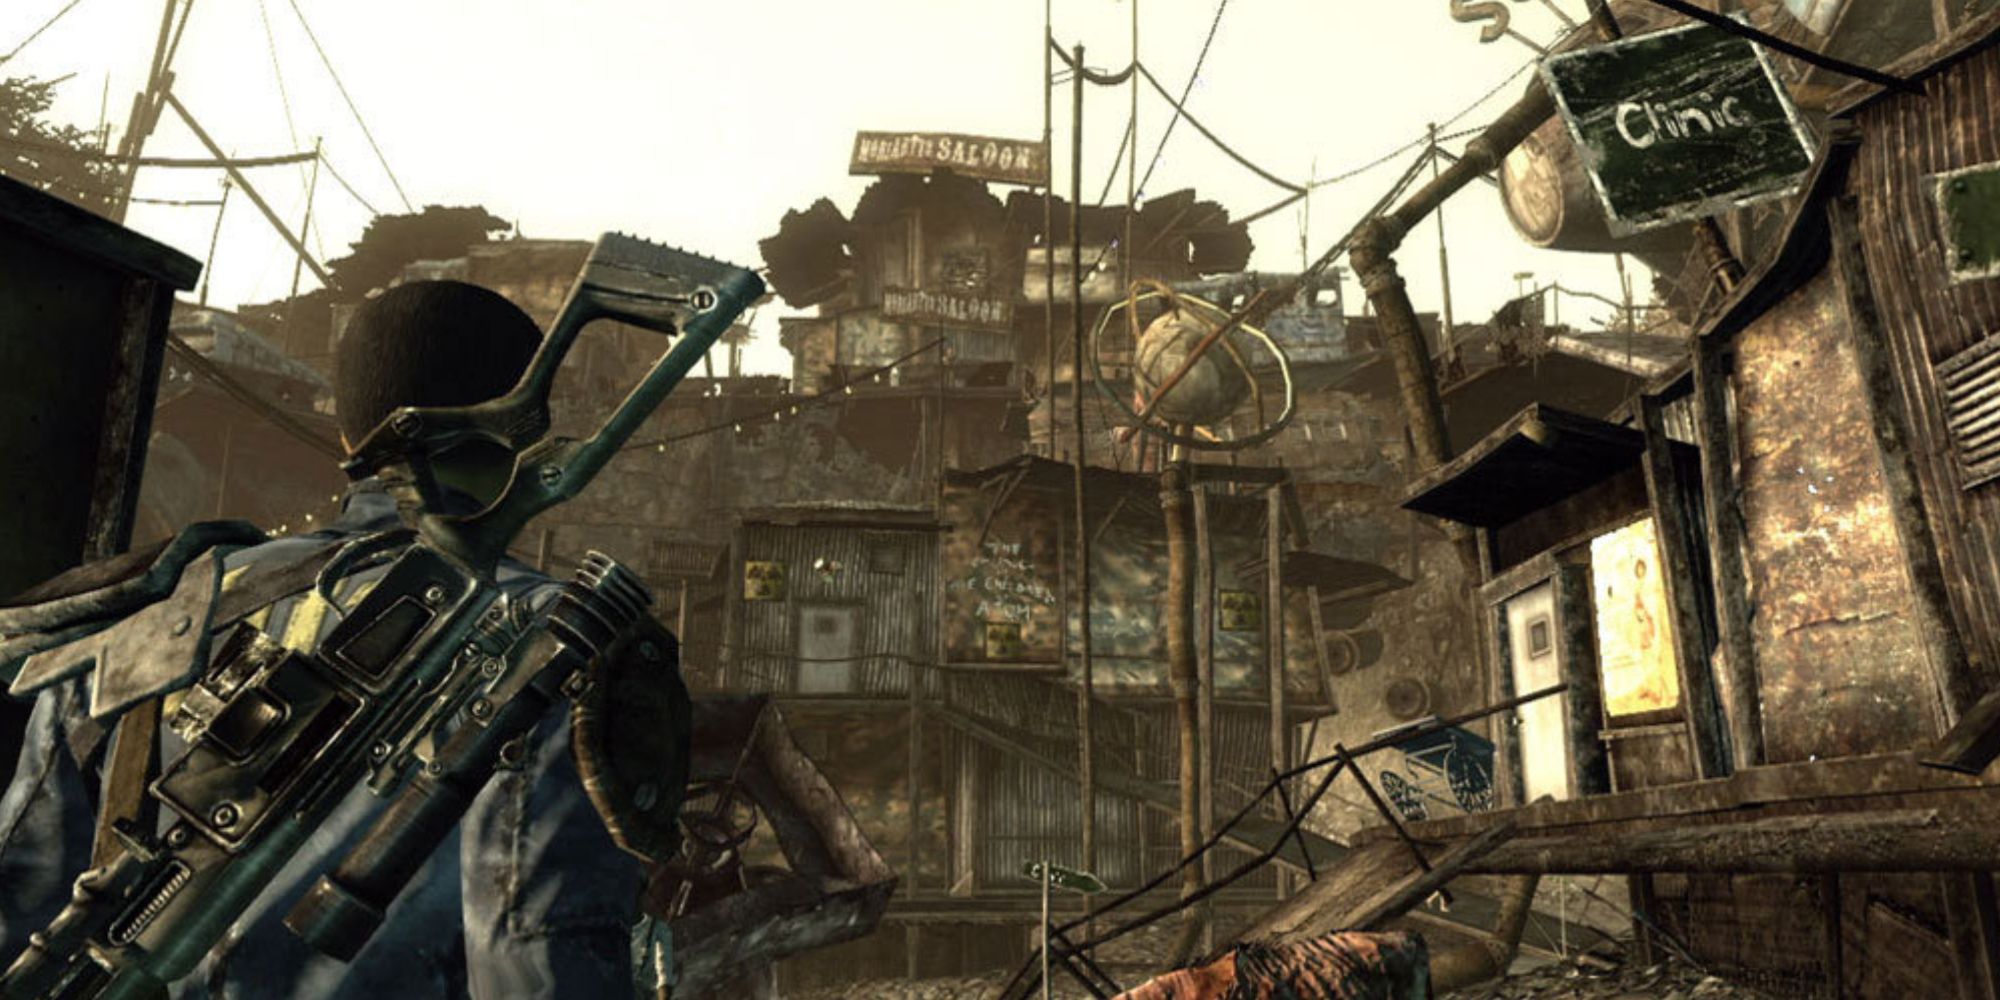 Exploring the wasteland in Fallout 3